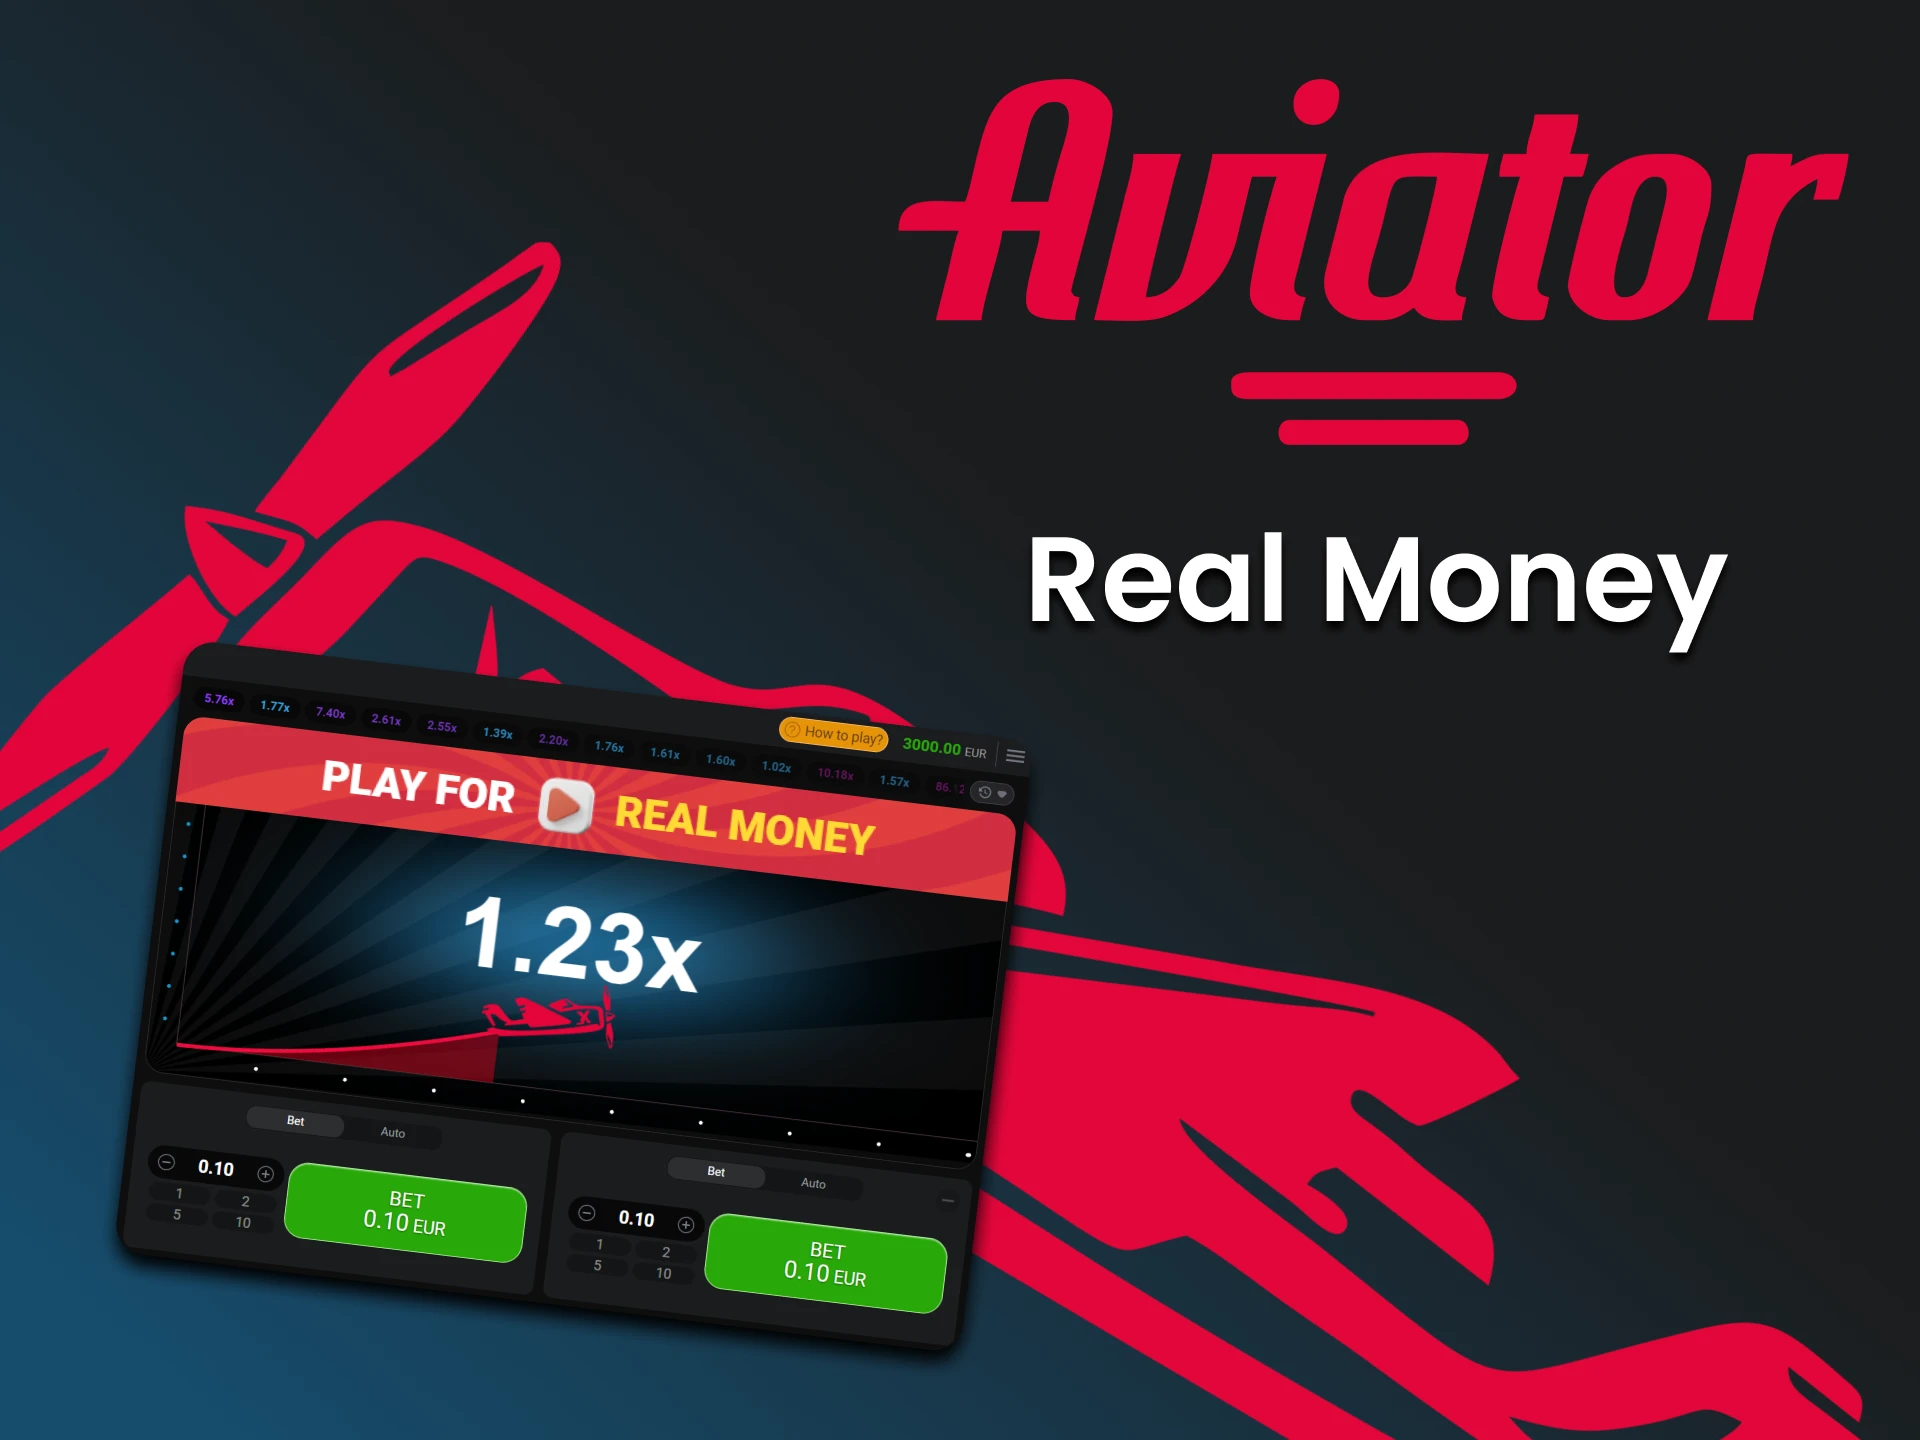 Win real money with Aviator.